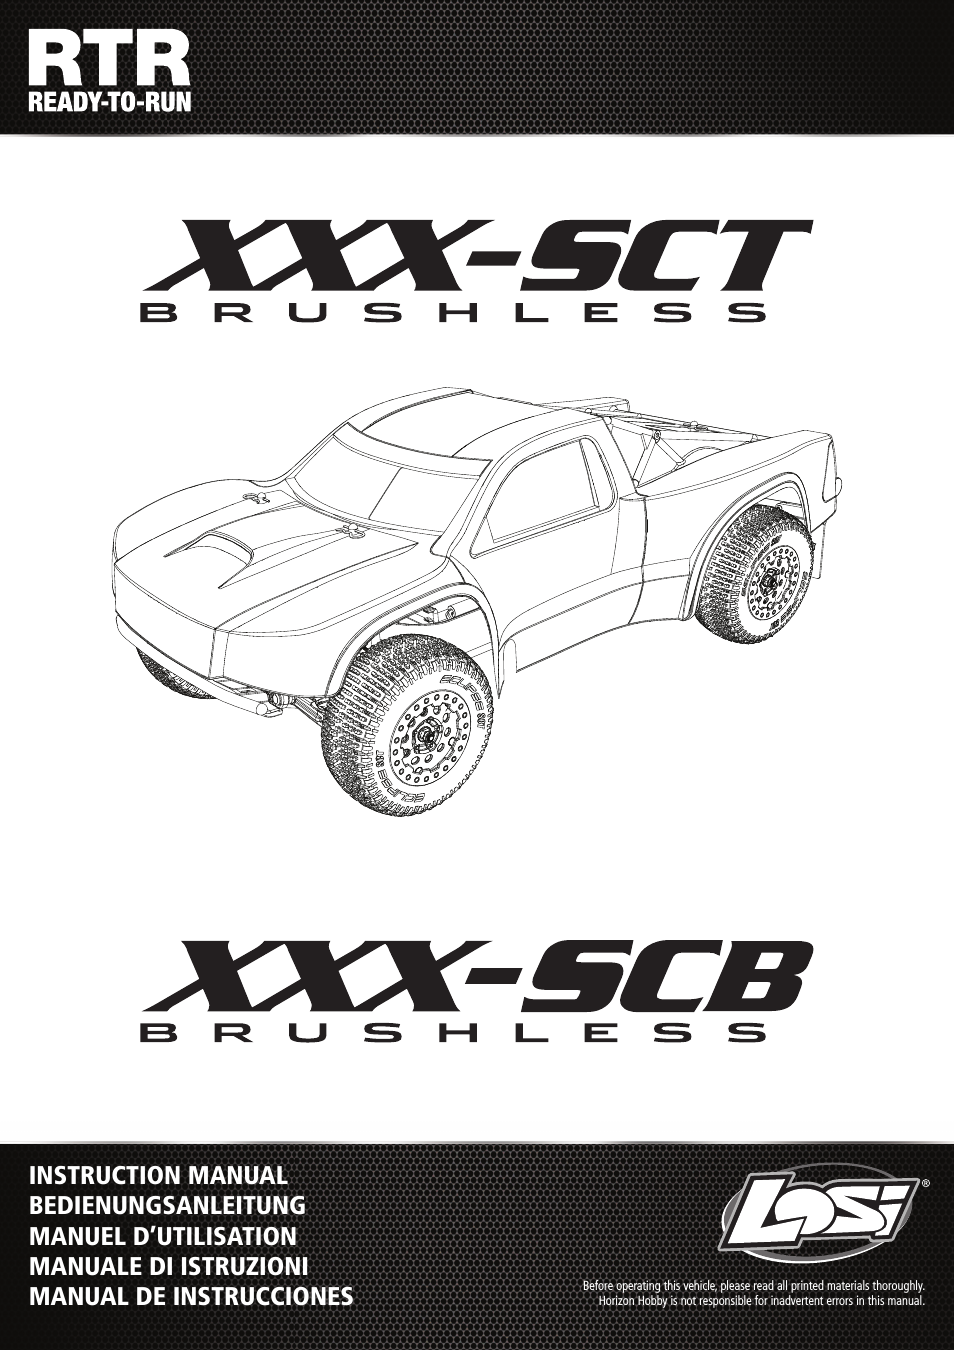 LOS03002 XXX-SCT Brushless RTR